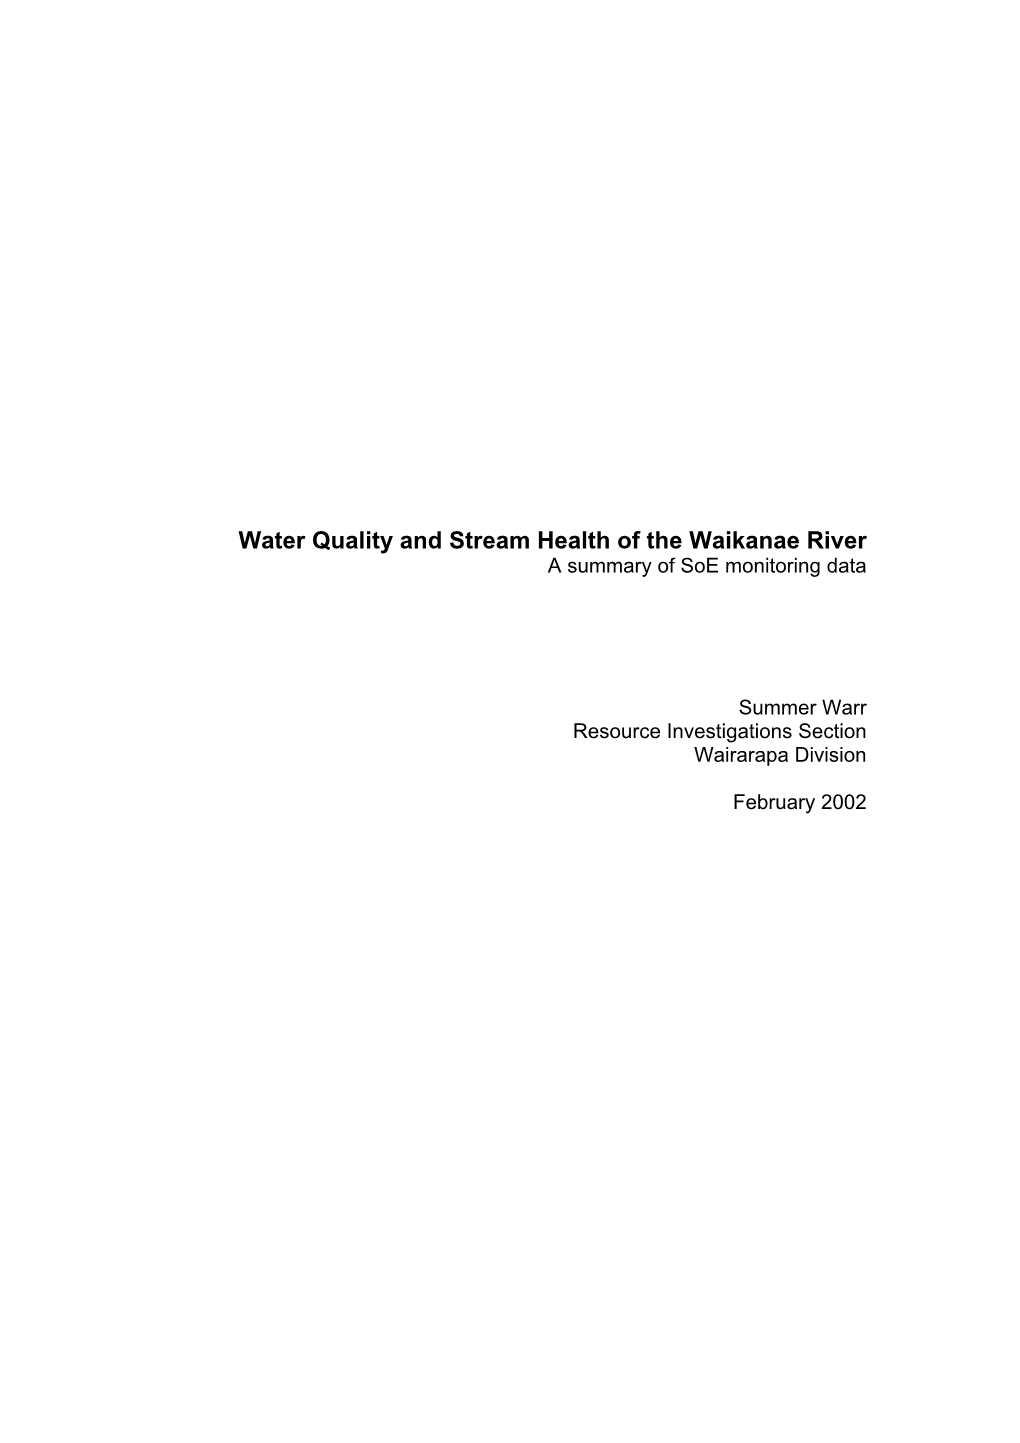 Water Quality and Stream Health of the Waikanae River a Summary of Soe Monitoring Data